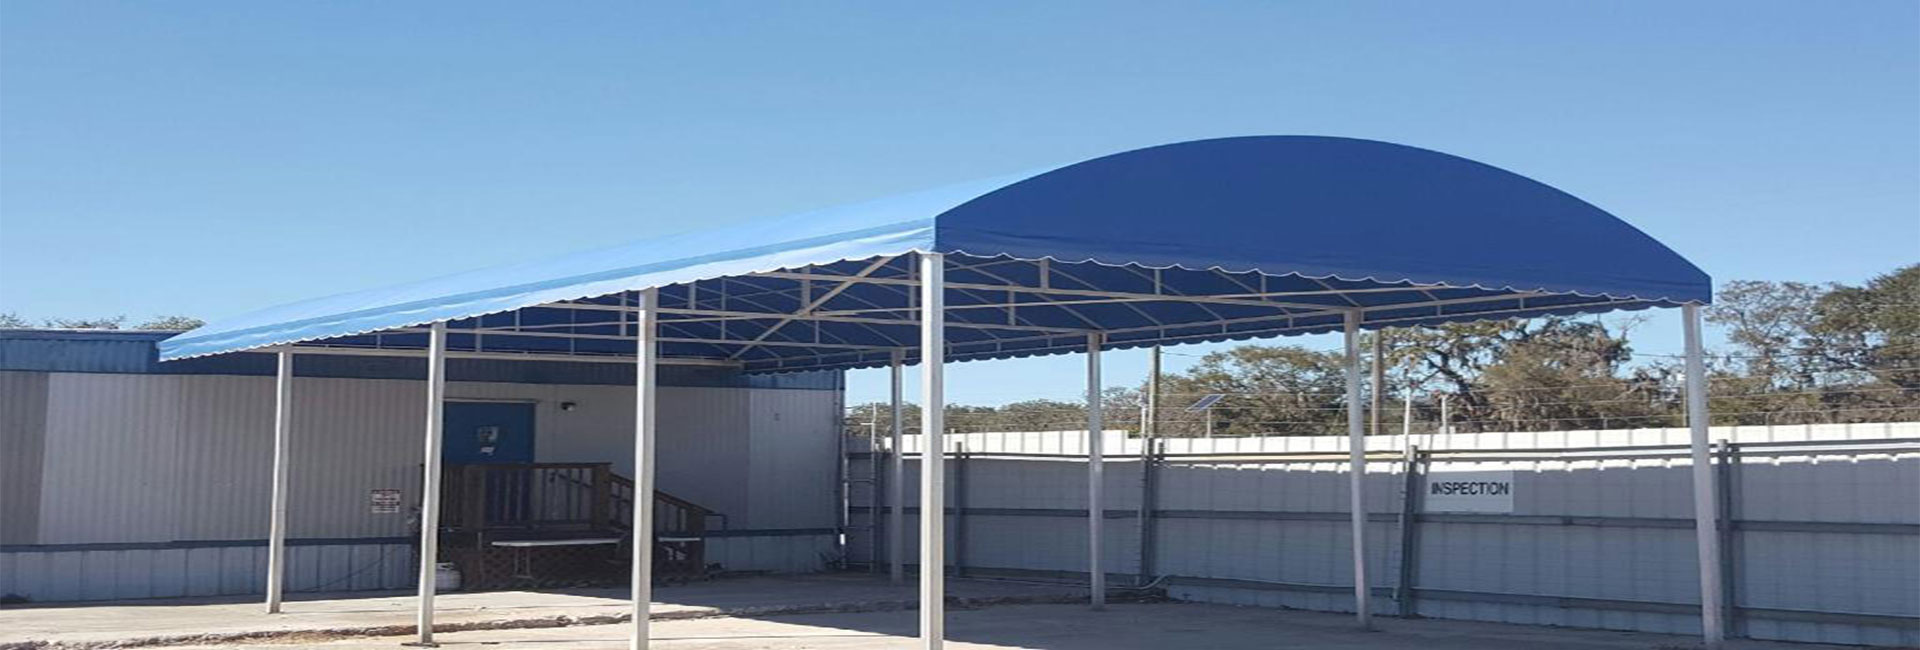 Cover Up Awning Vinyl Products